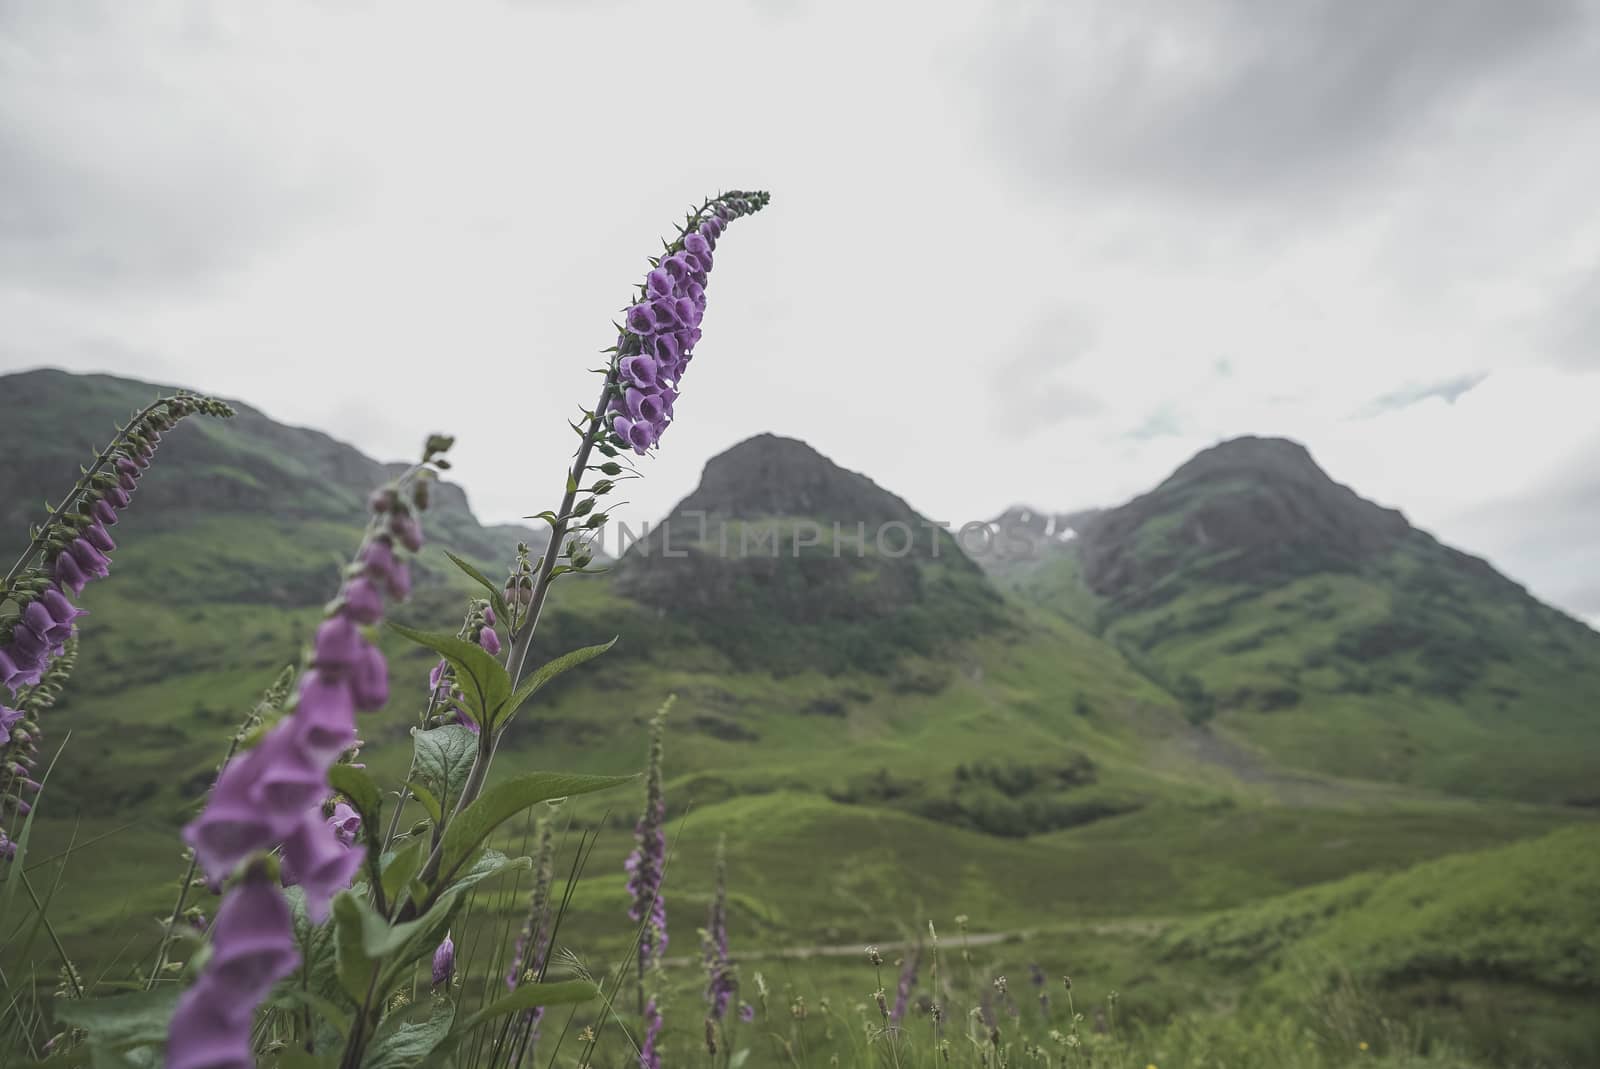 Beautiful landscape of the three sisters in Glencoe, Scotland with a purple flower in front of it